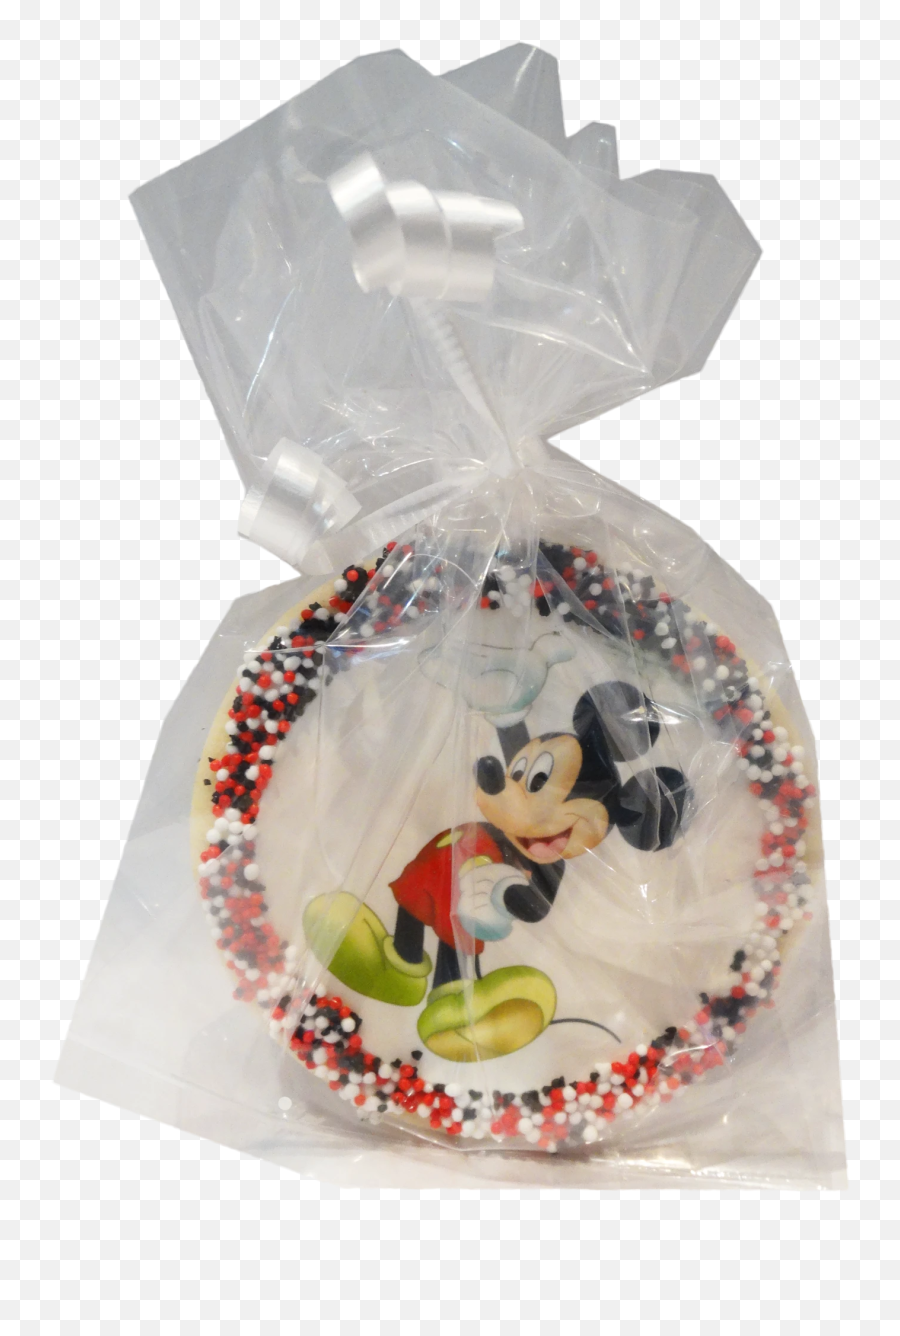 Mickey Mouse Sugar Cookies With Nonpareils - Girl Emoji,Mickey Mouse Emoji For Facebook